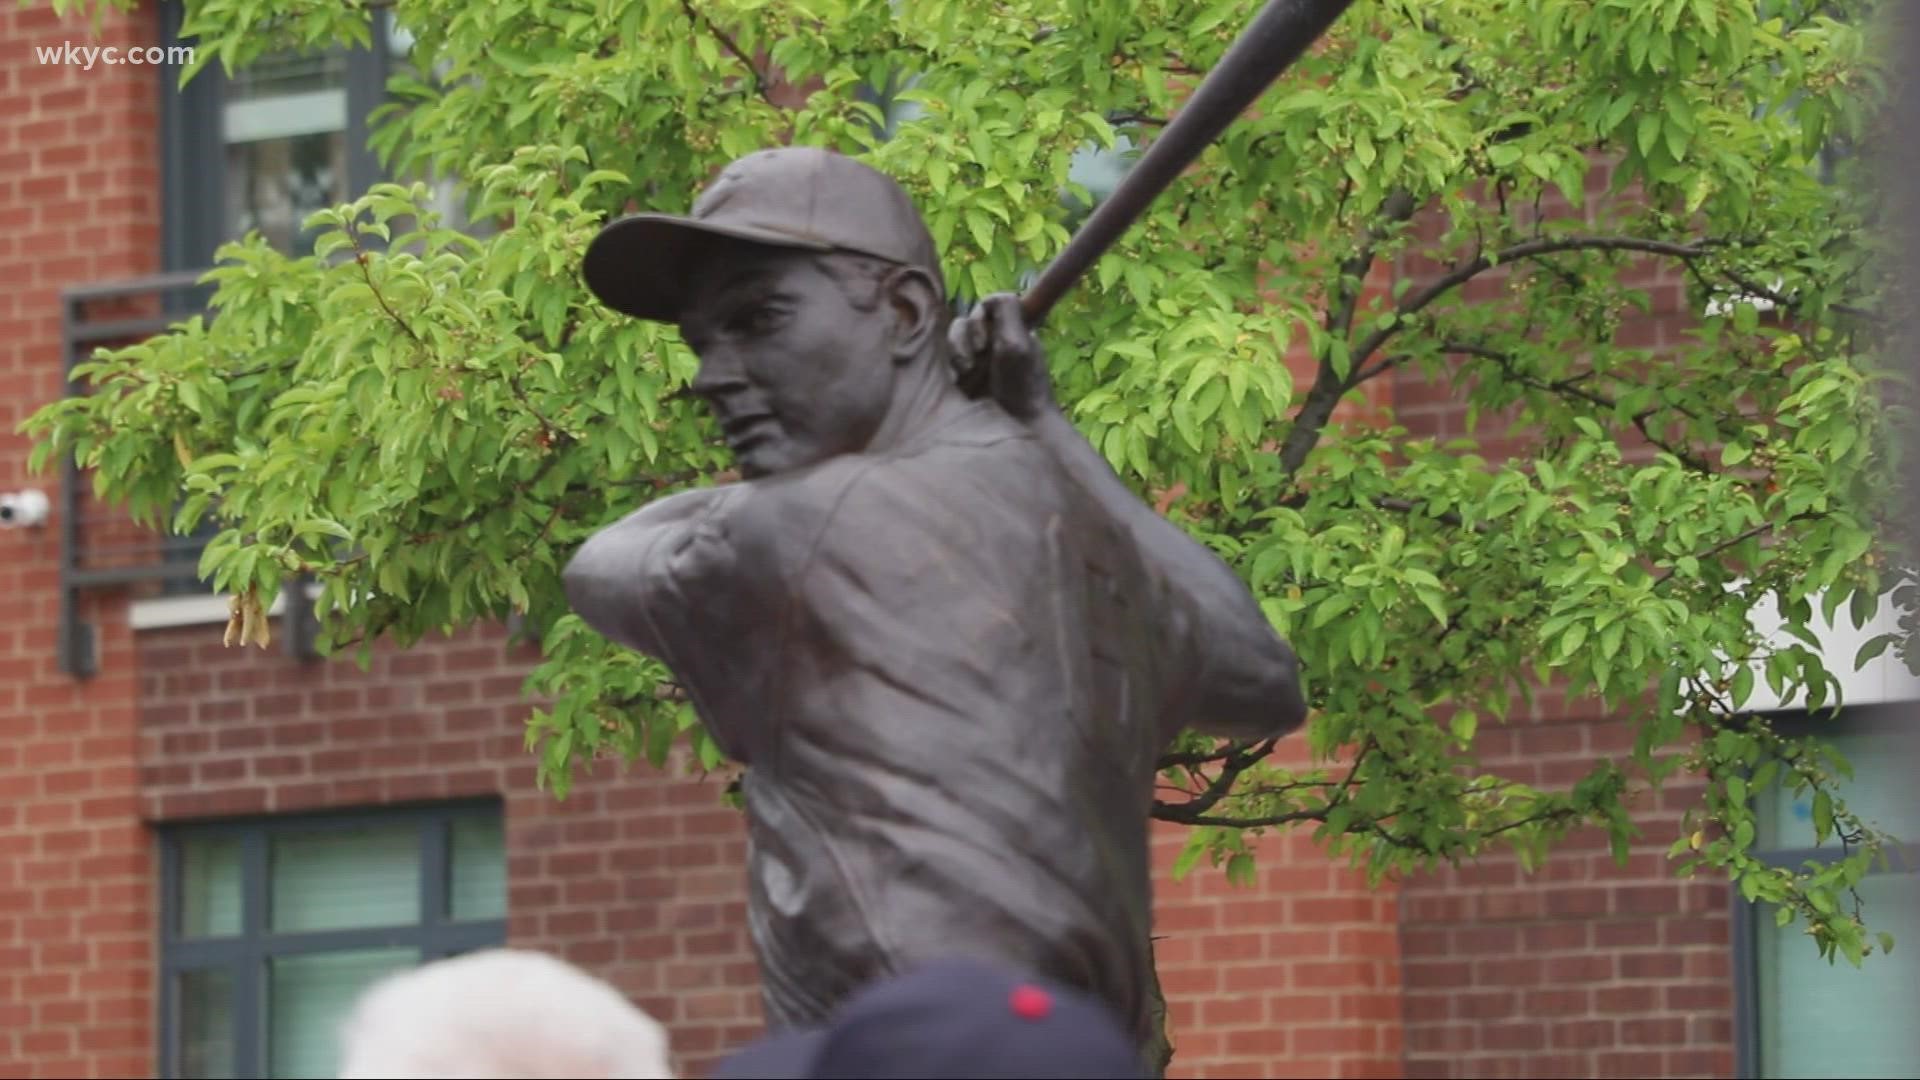 Rocky Colavito was honored today in Little Italy with a statue.